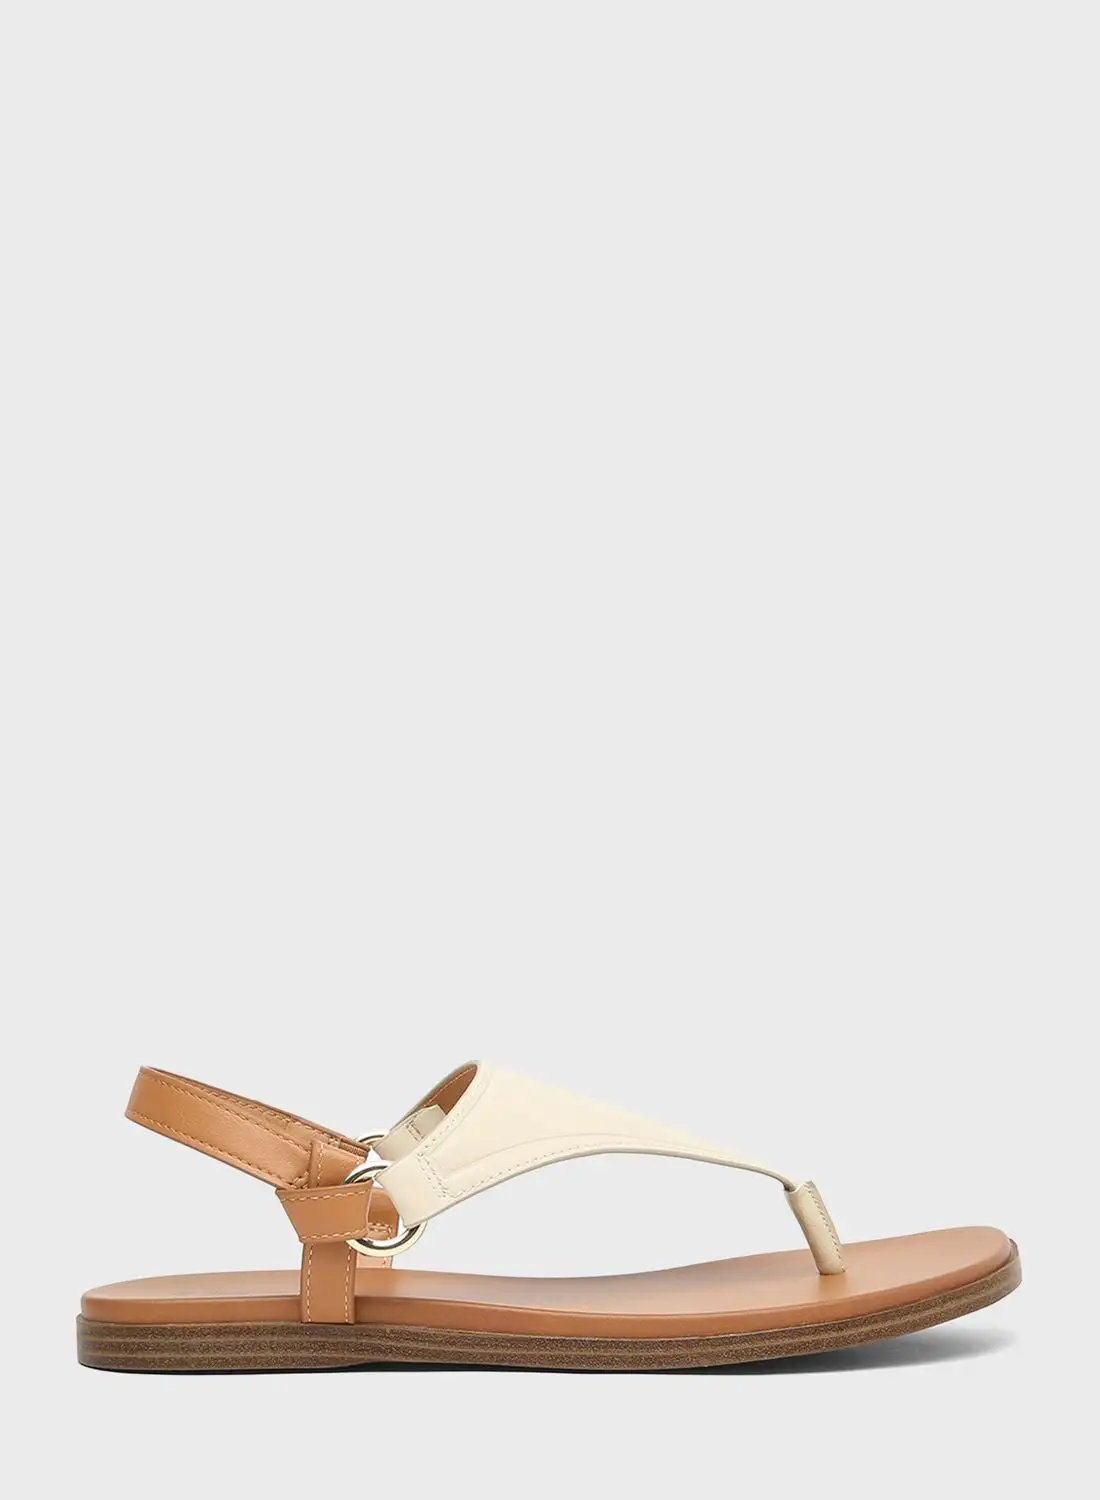 CALL IT SPRING Zollie Sandals